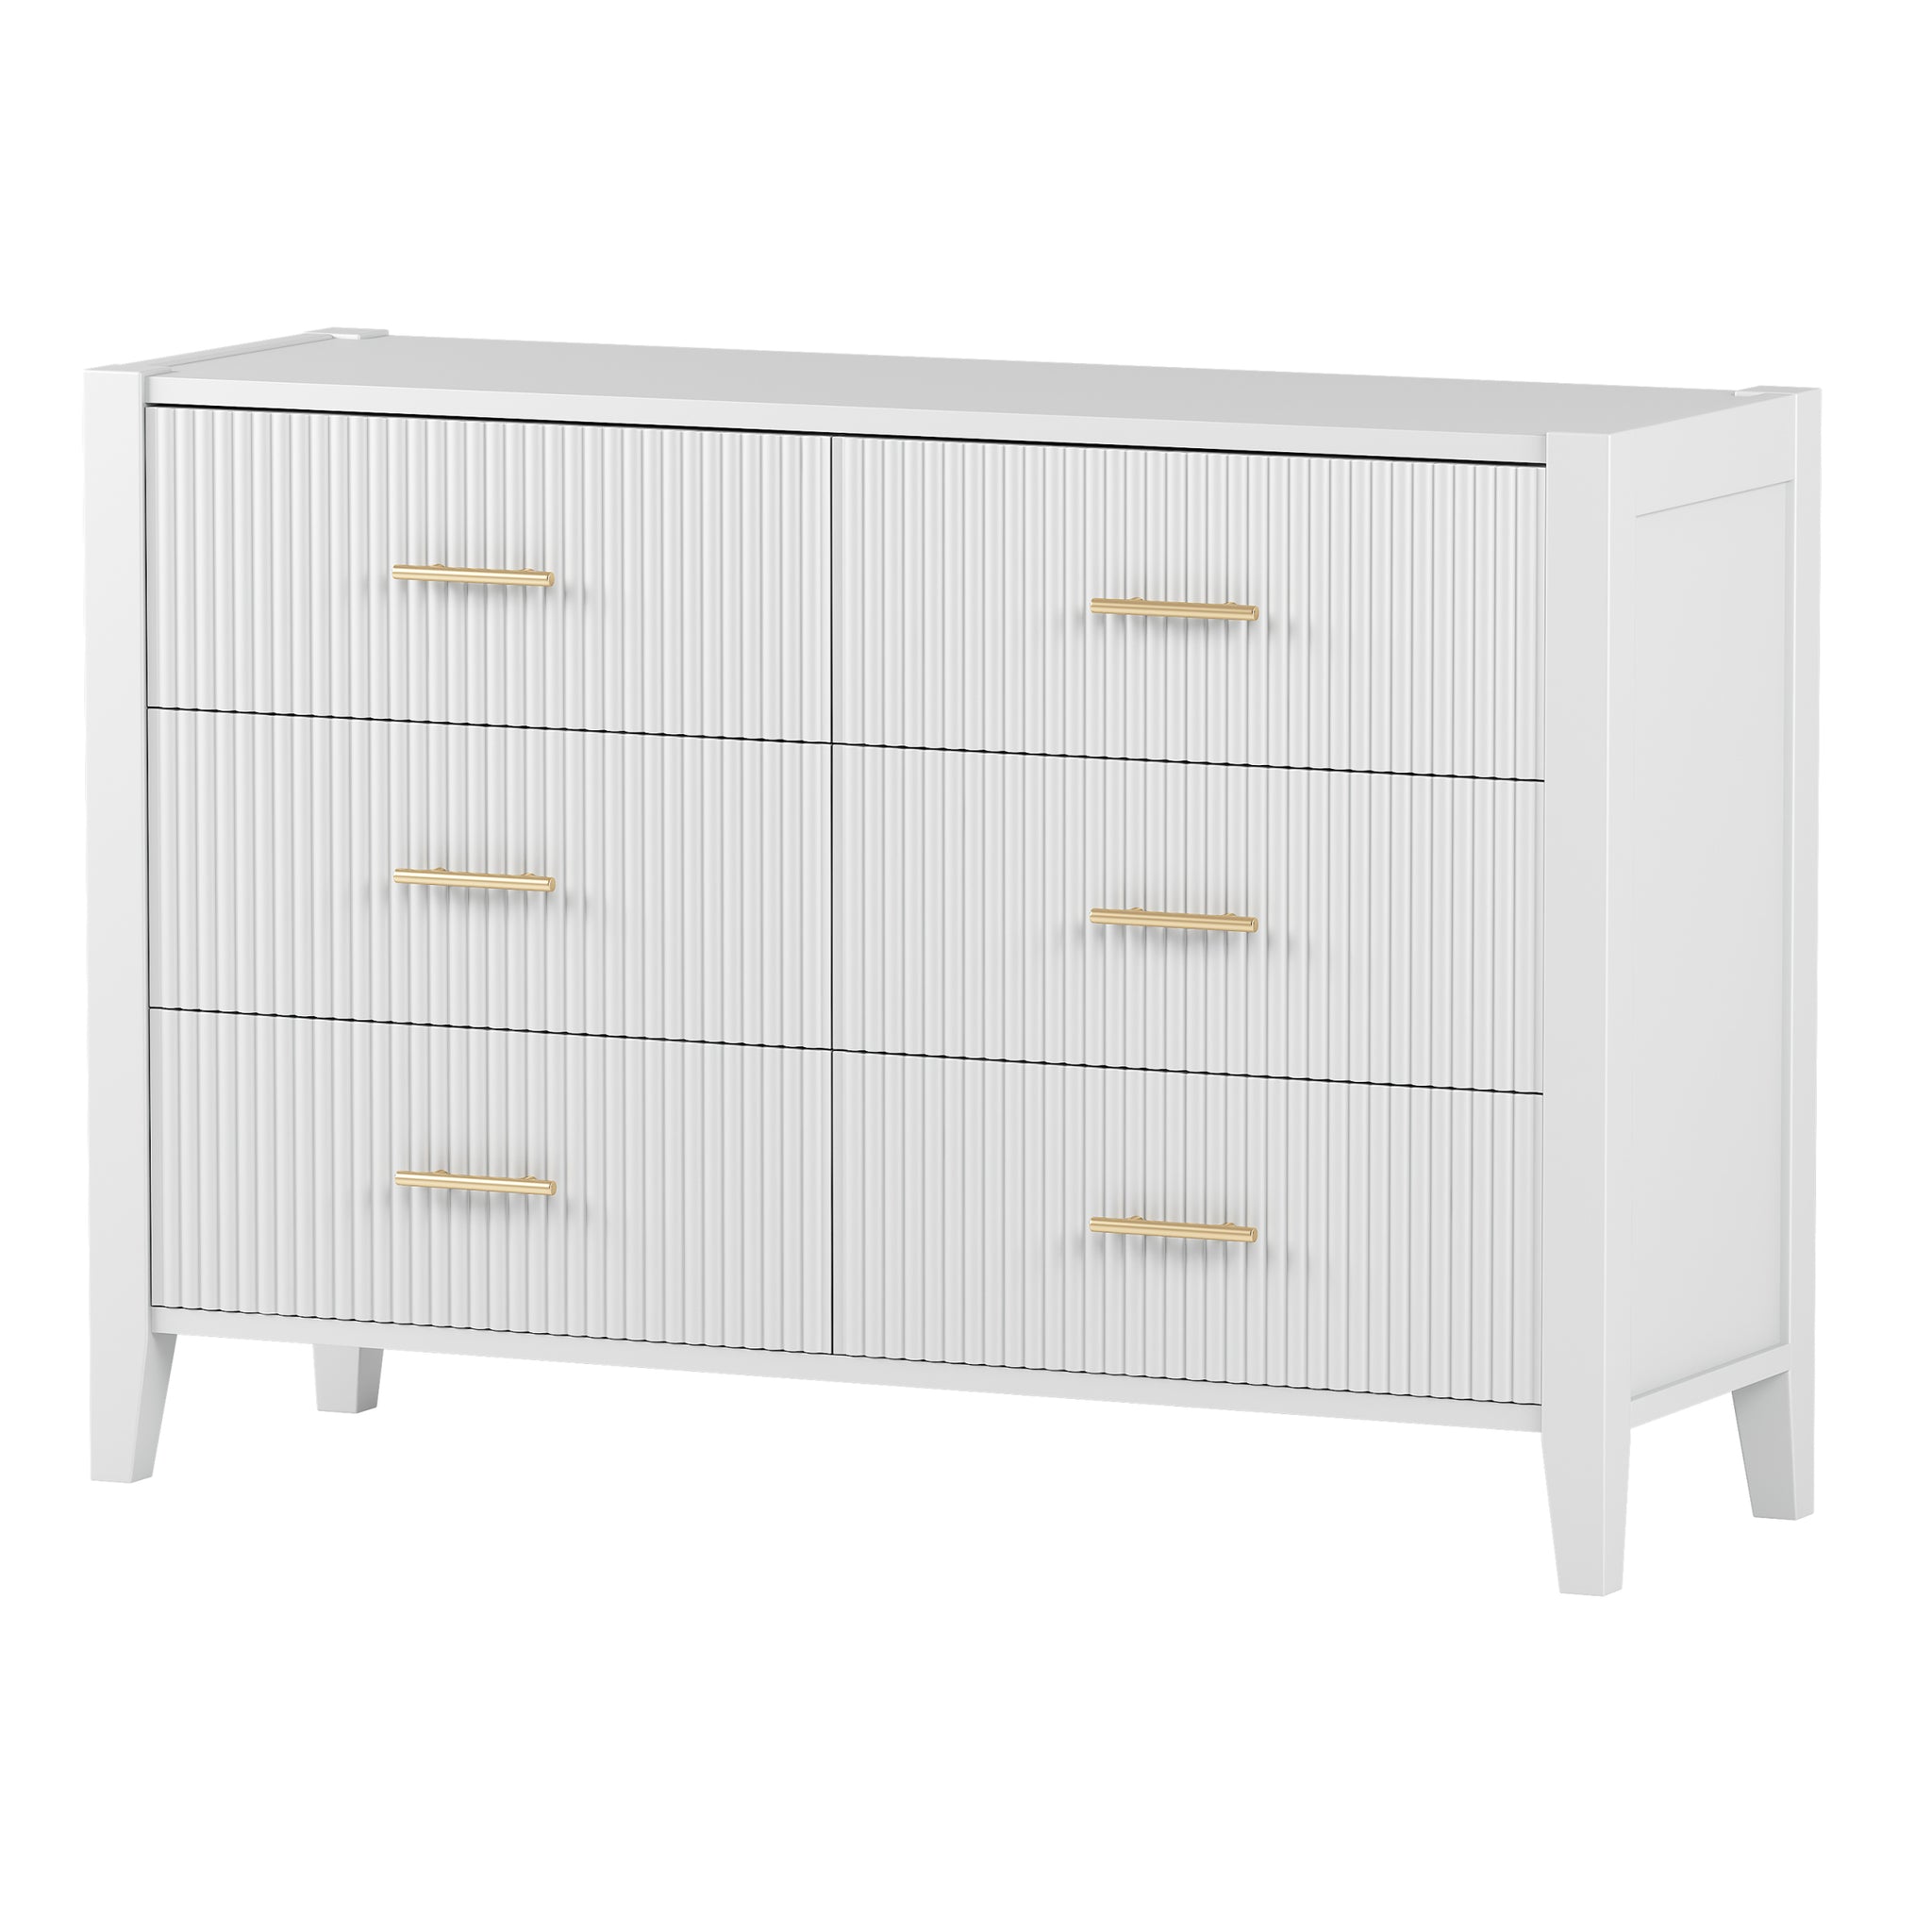 6 Drawer Dresser with Metal Handle for Bedroom white-particle board